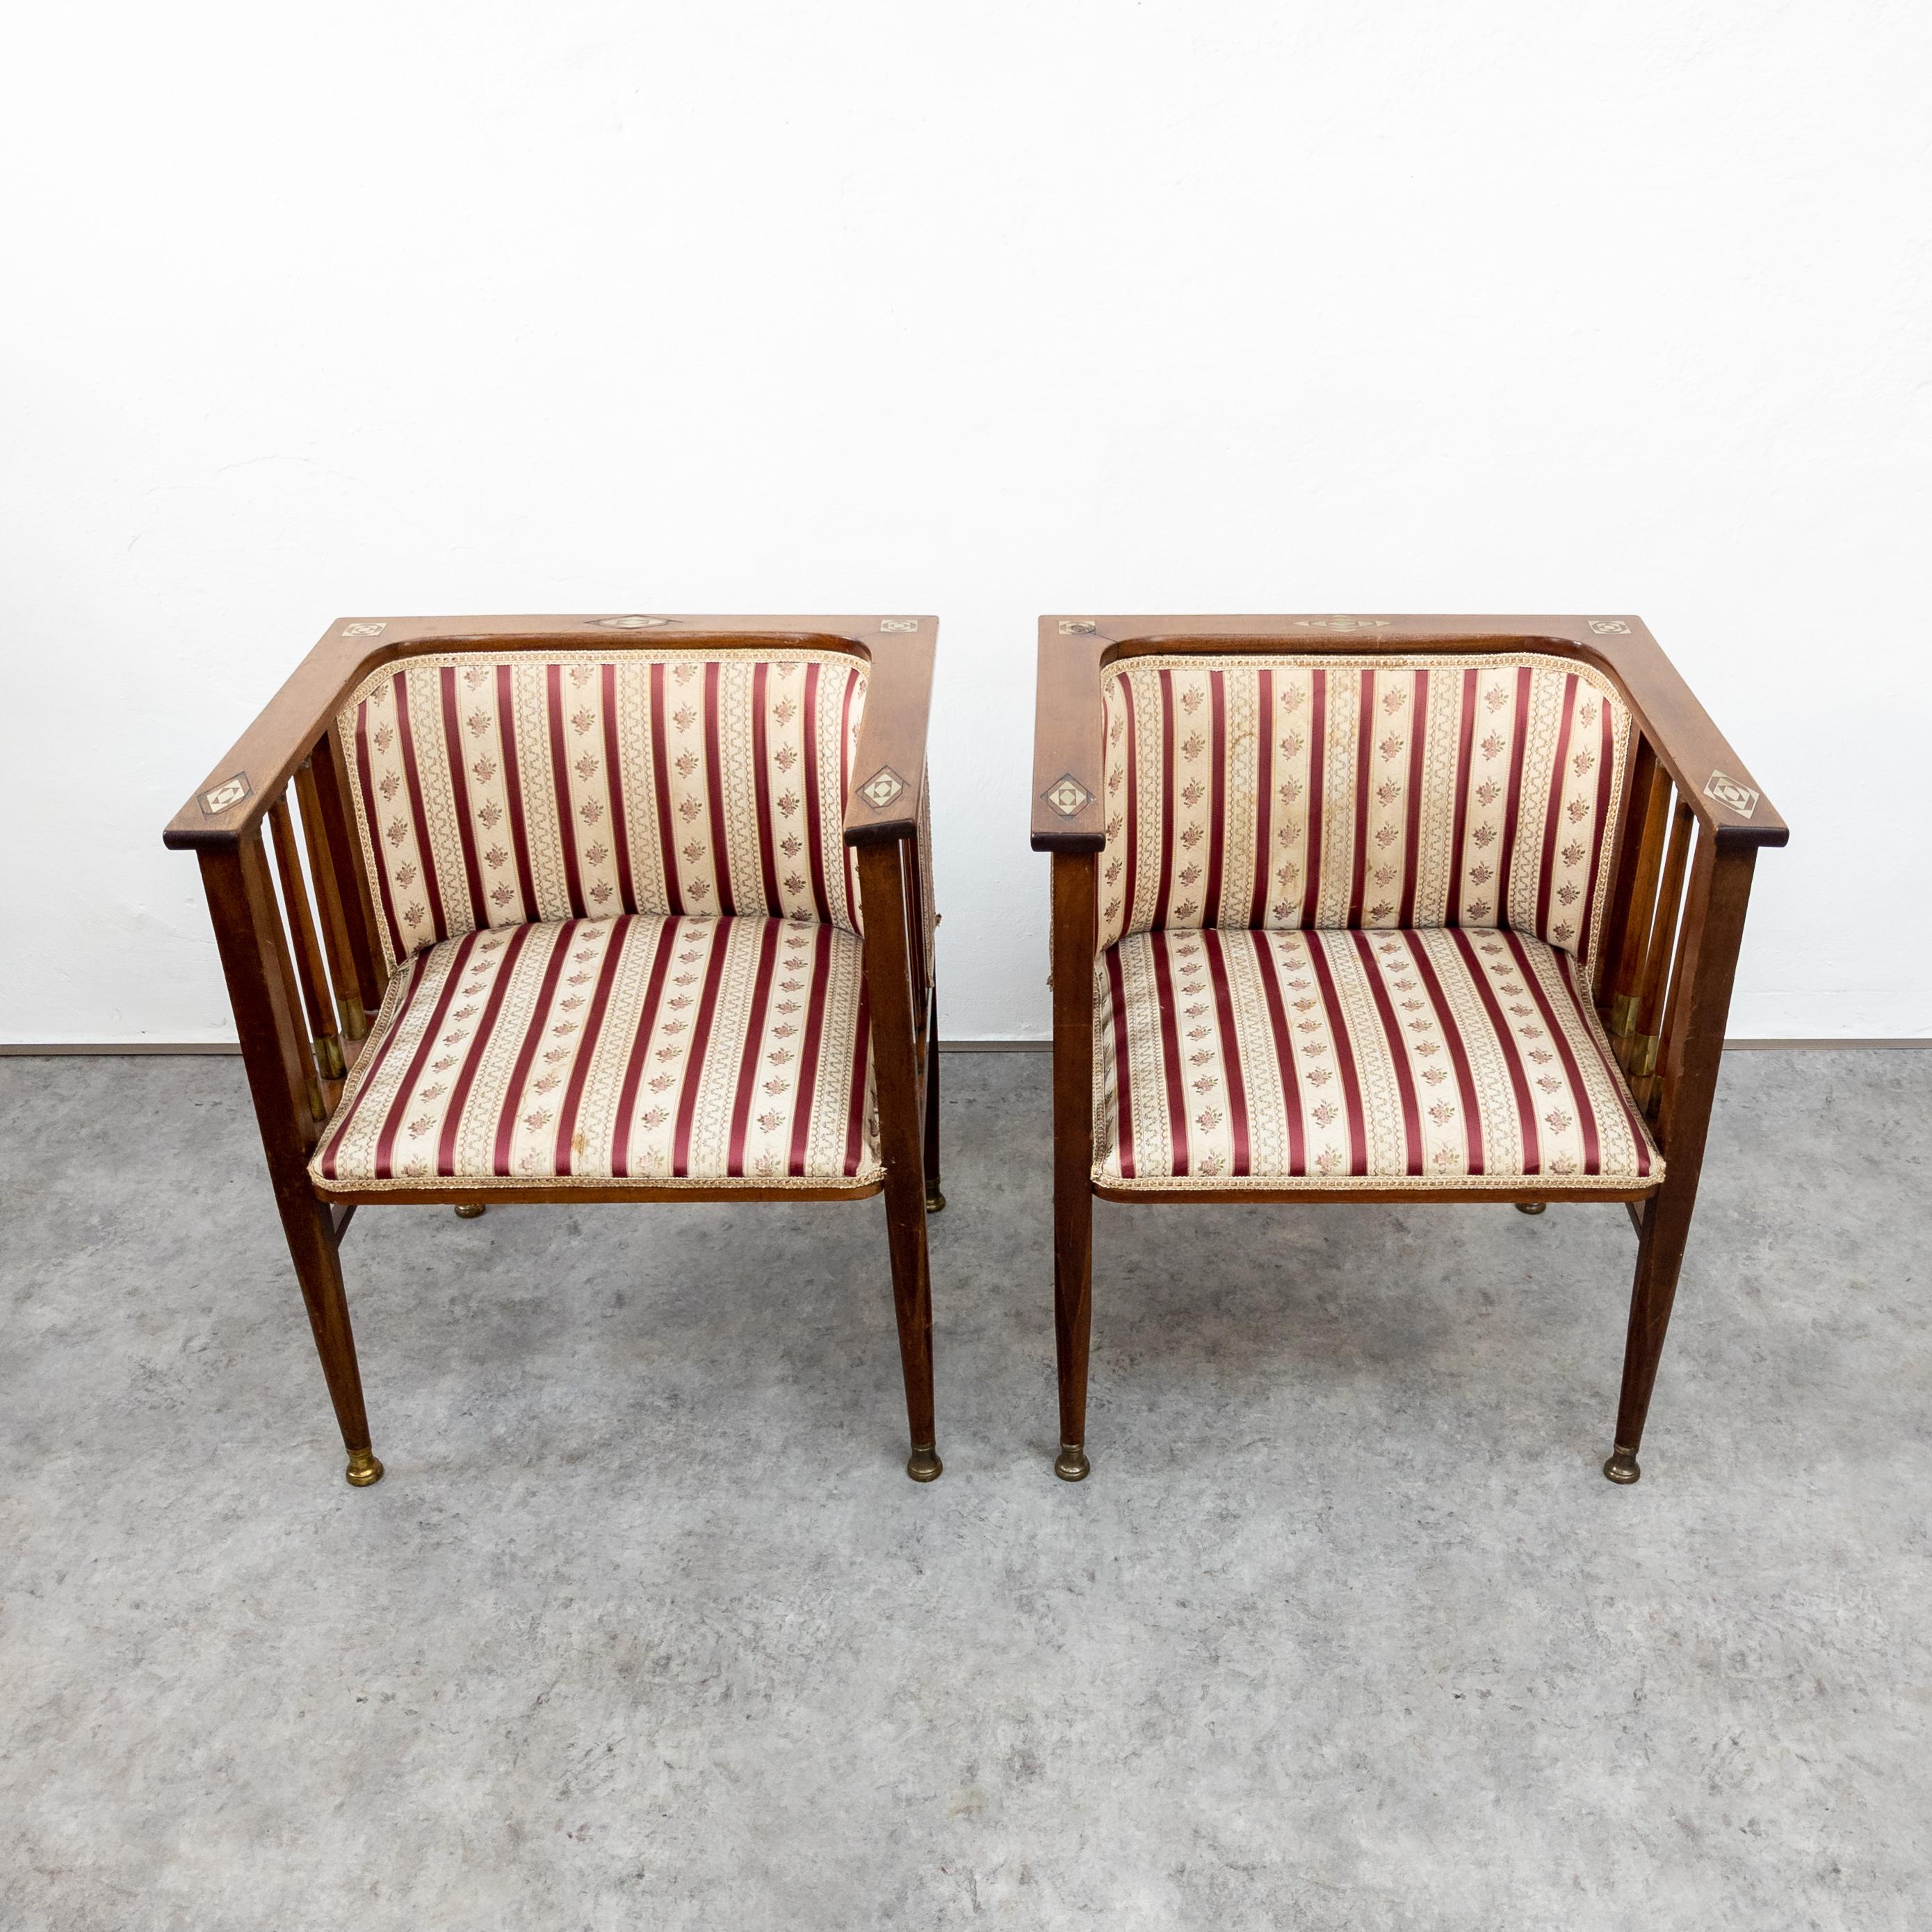 Art Nouveau Mahogany and Brass Armchairs by Hans Christiansen For Sale 4